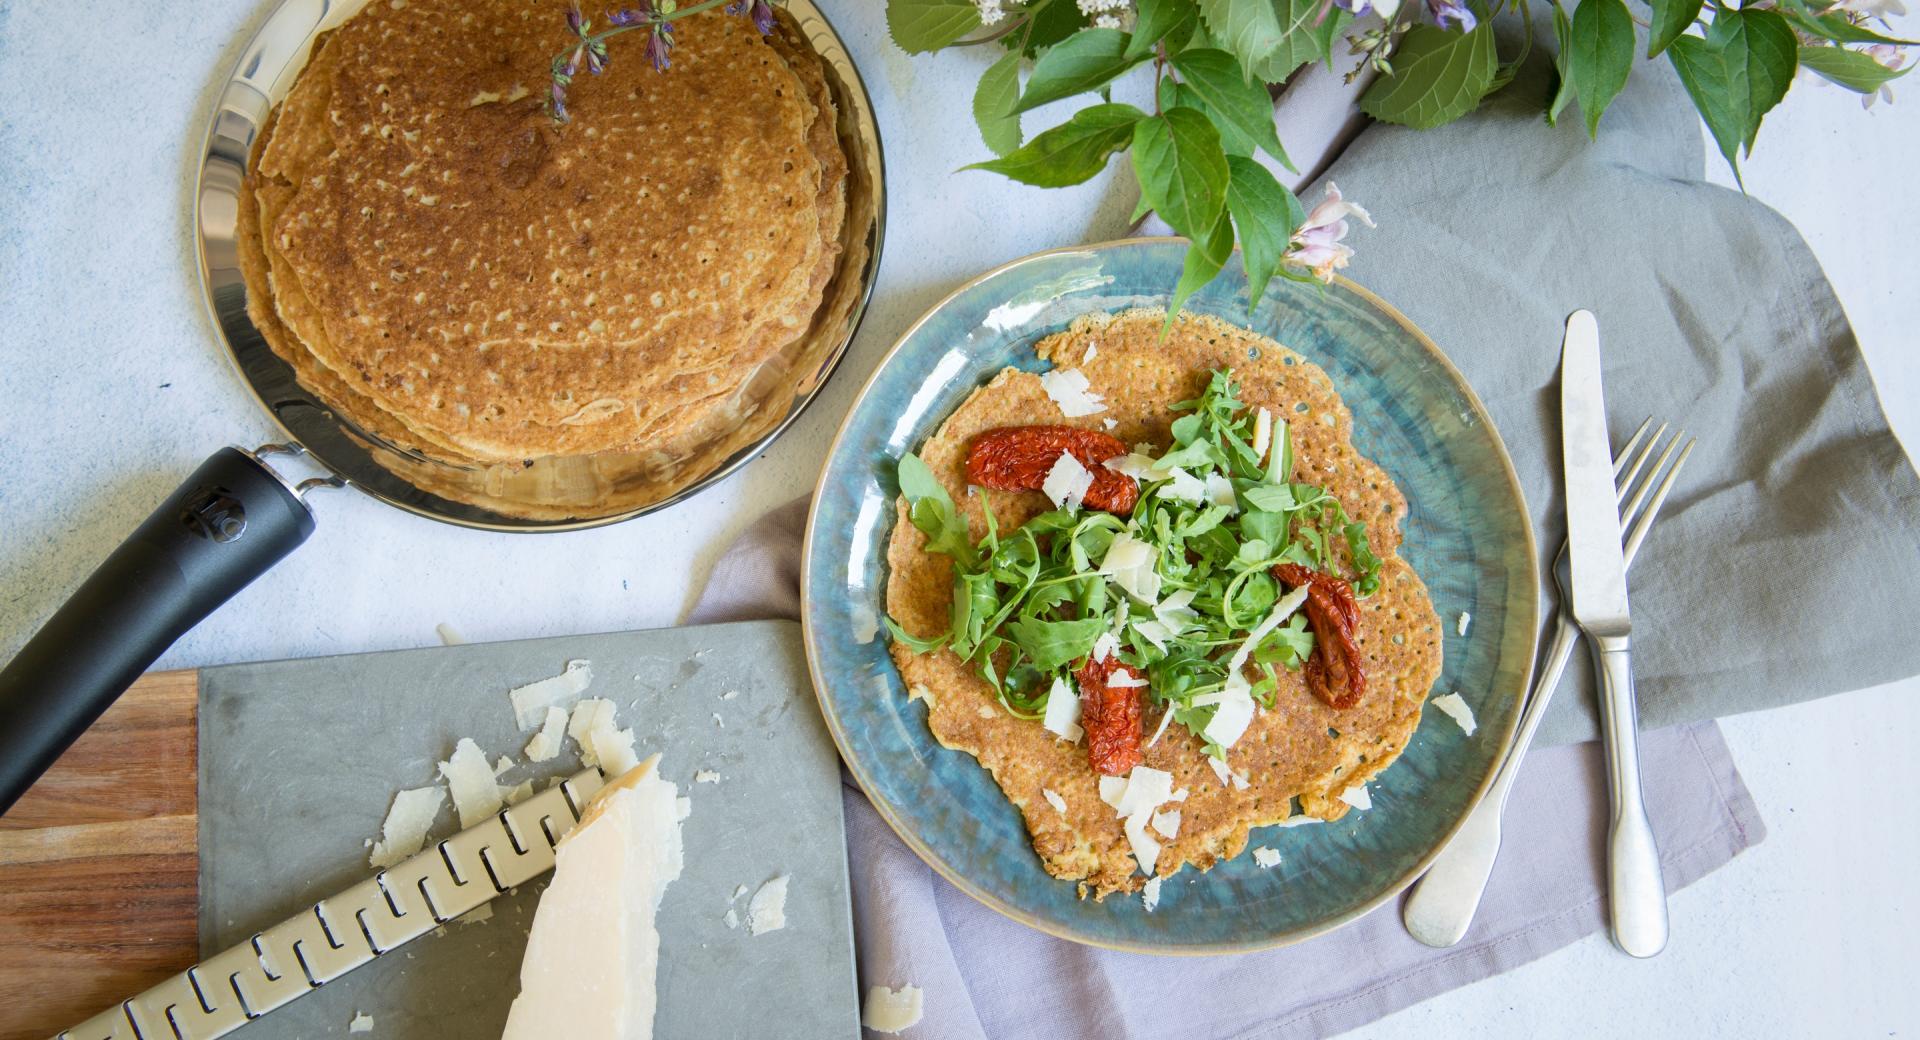 Panella (flatbread made from chickpea flour)